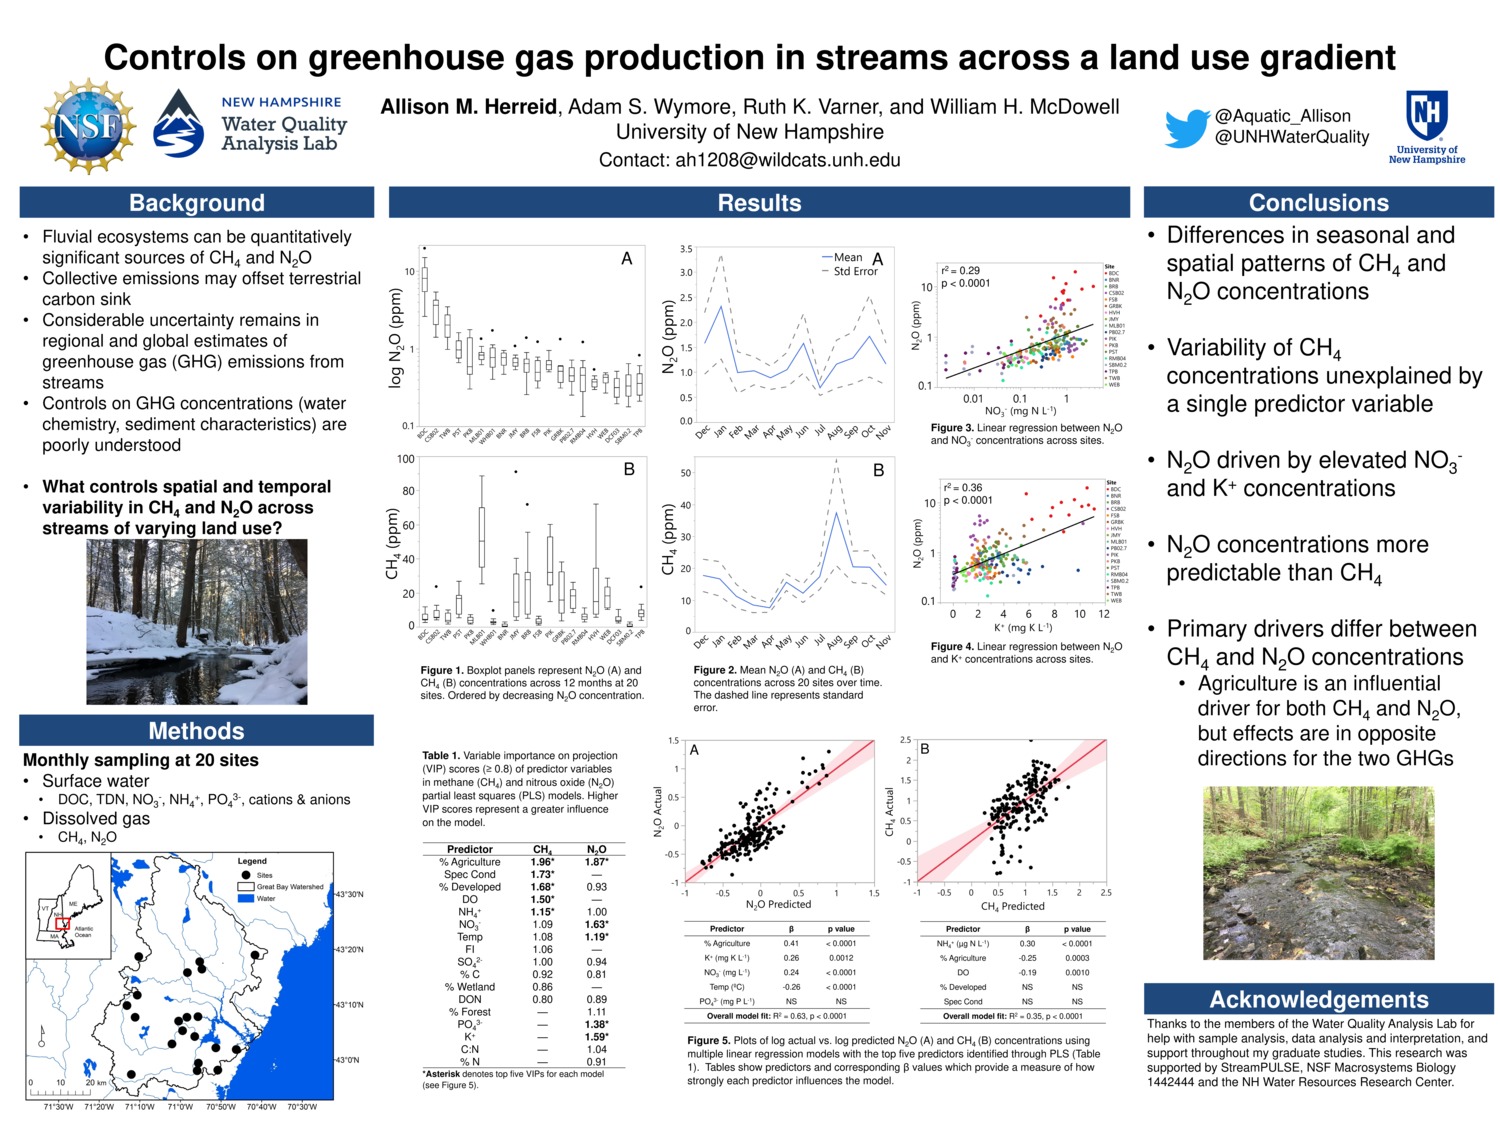 Controls On Greenhouse Gas Production In Streams Across A Land Use Gradient by ah1208